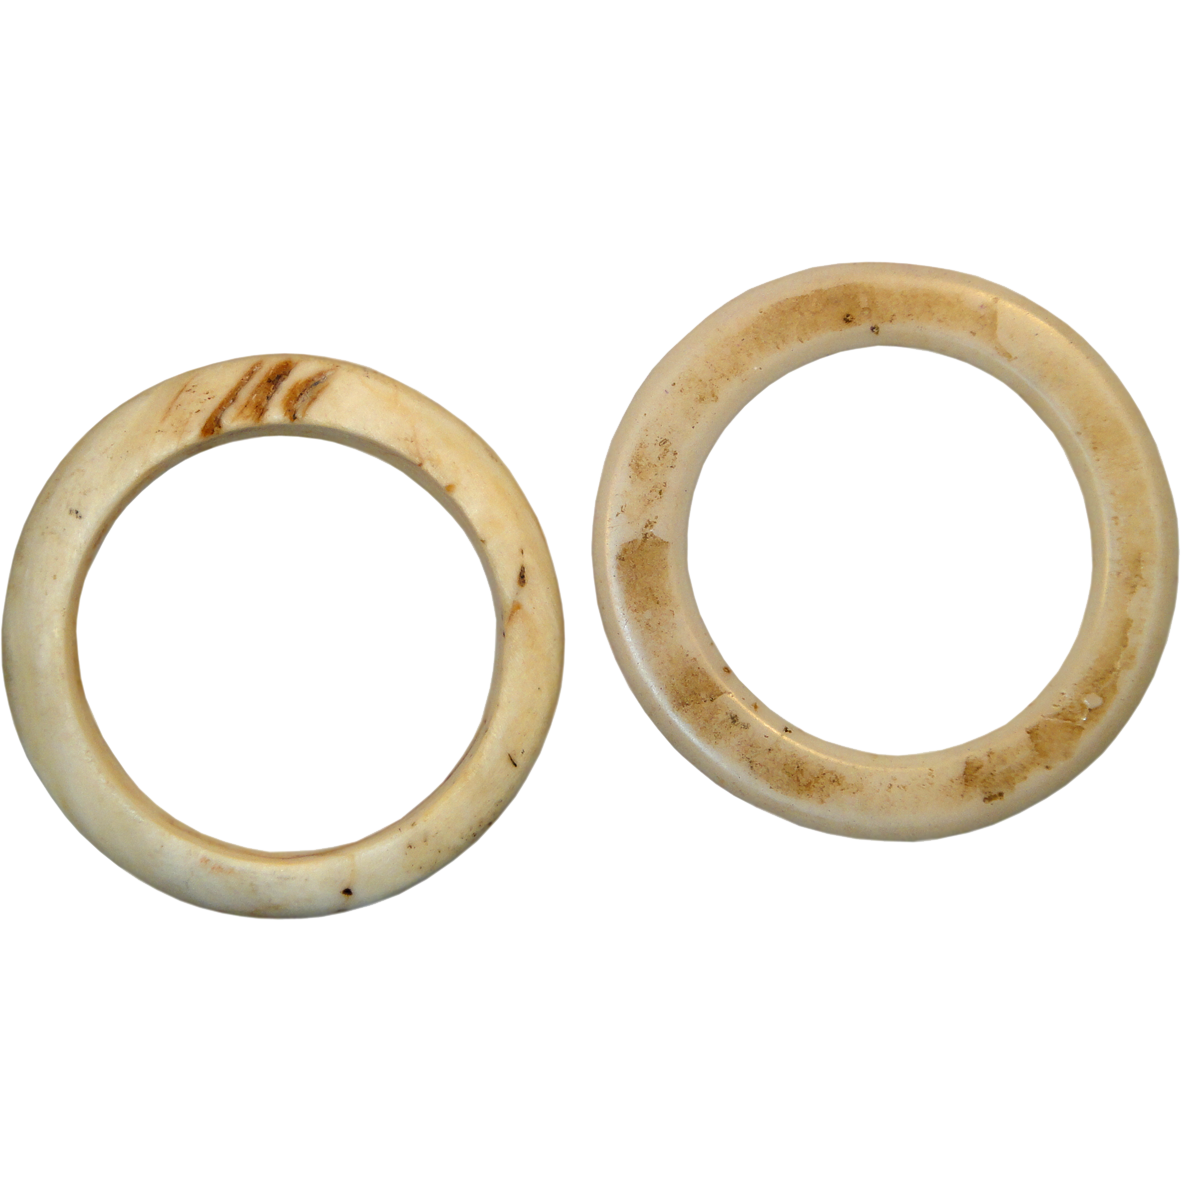 Papua New Guinea and Europe, Clam Shell Ring and Imitation from Glass (reverse)